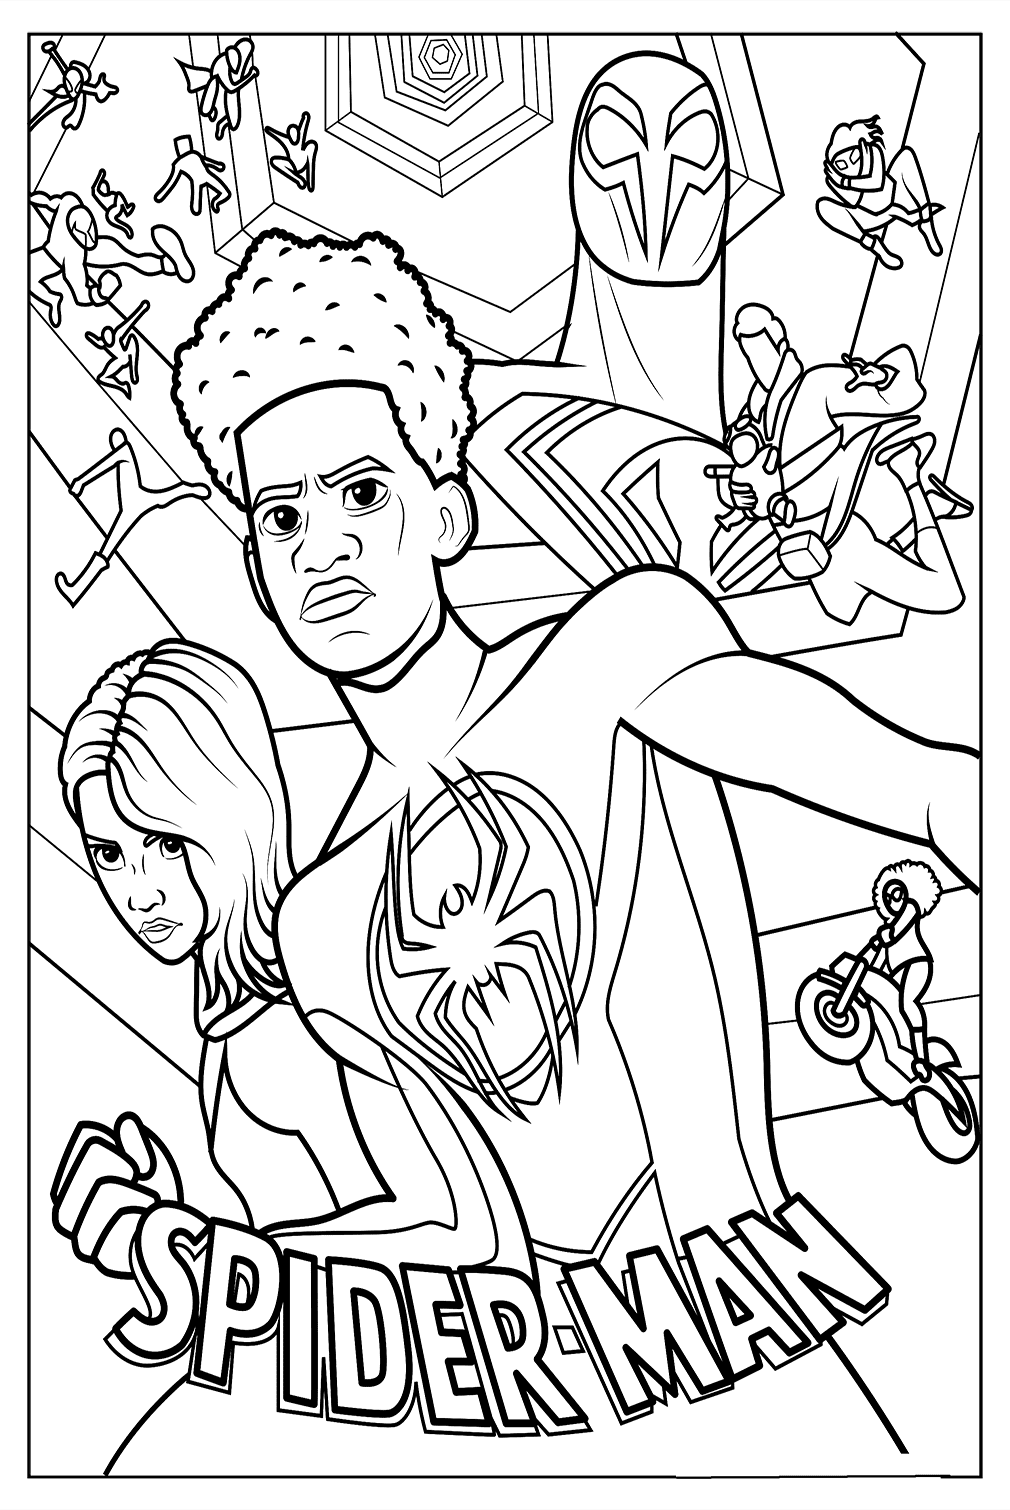 Spider-man Across The Spider Coloring Sheet